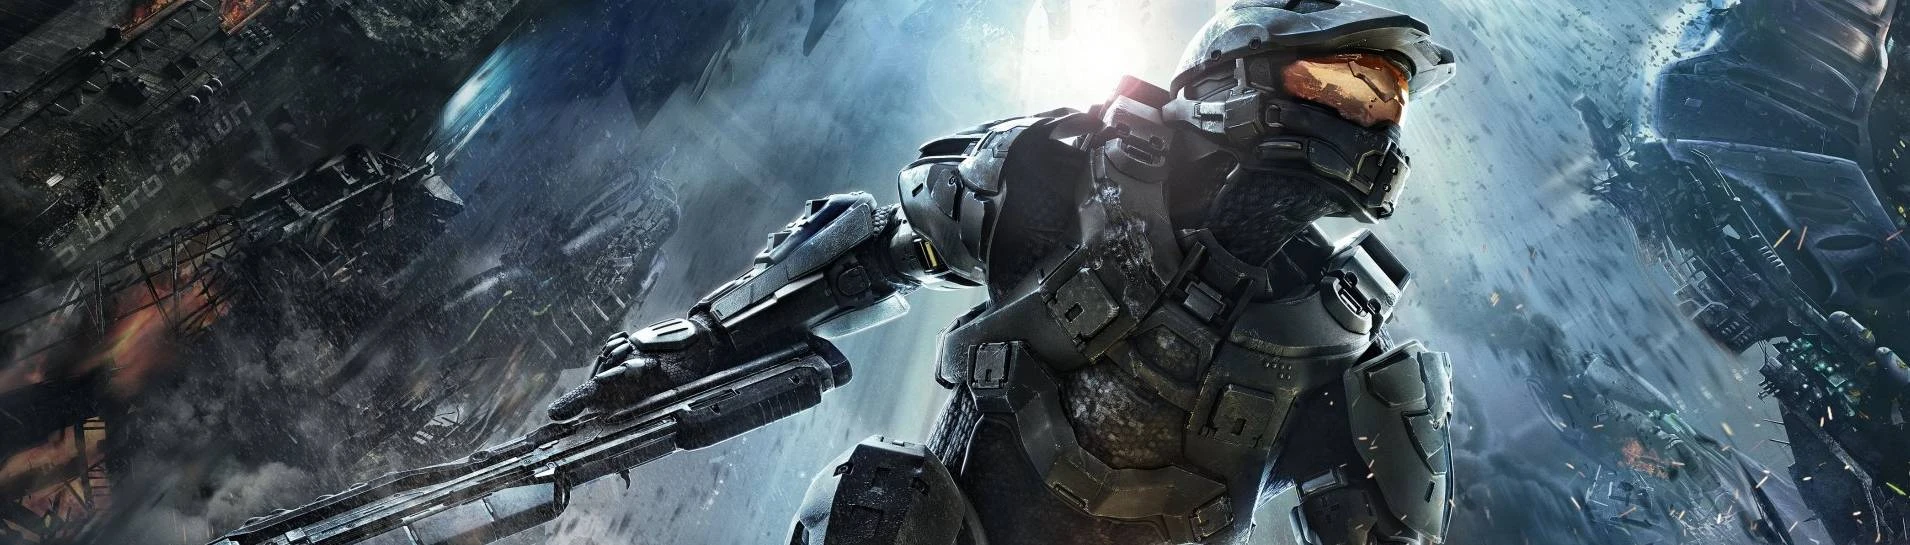 Halo 4 Spartan Ops Episodes Fix at Halo: The Master Chief Collection Nexus  - Mods and community